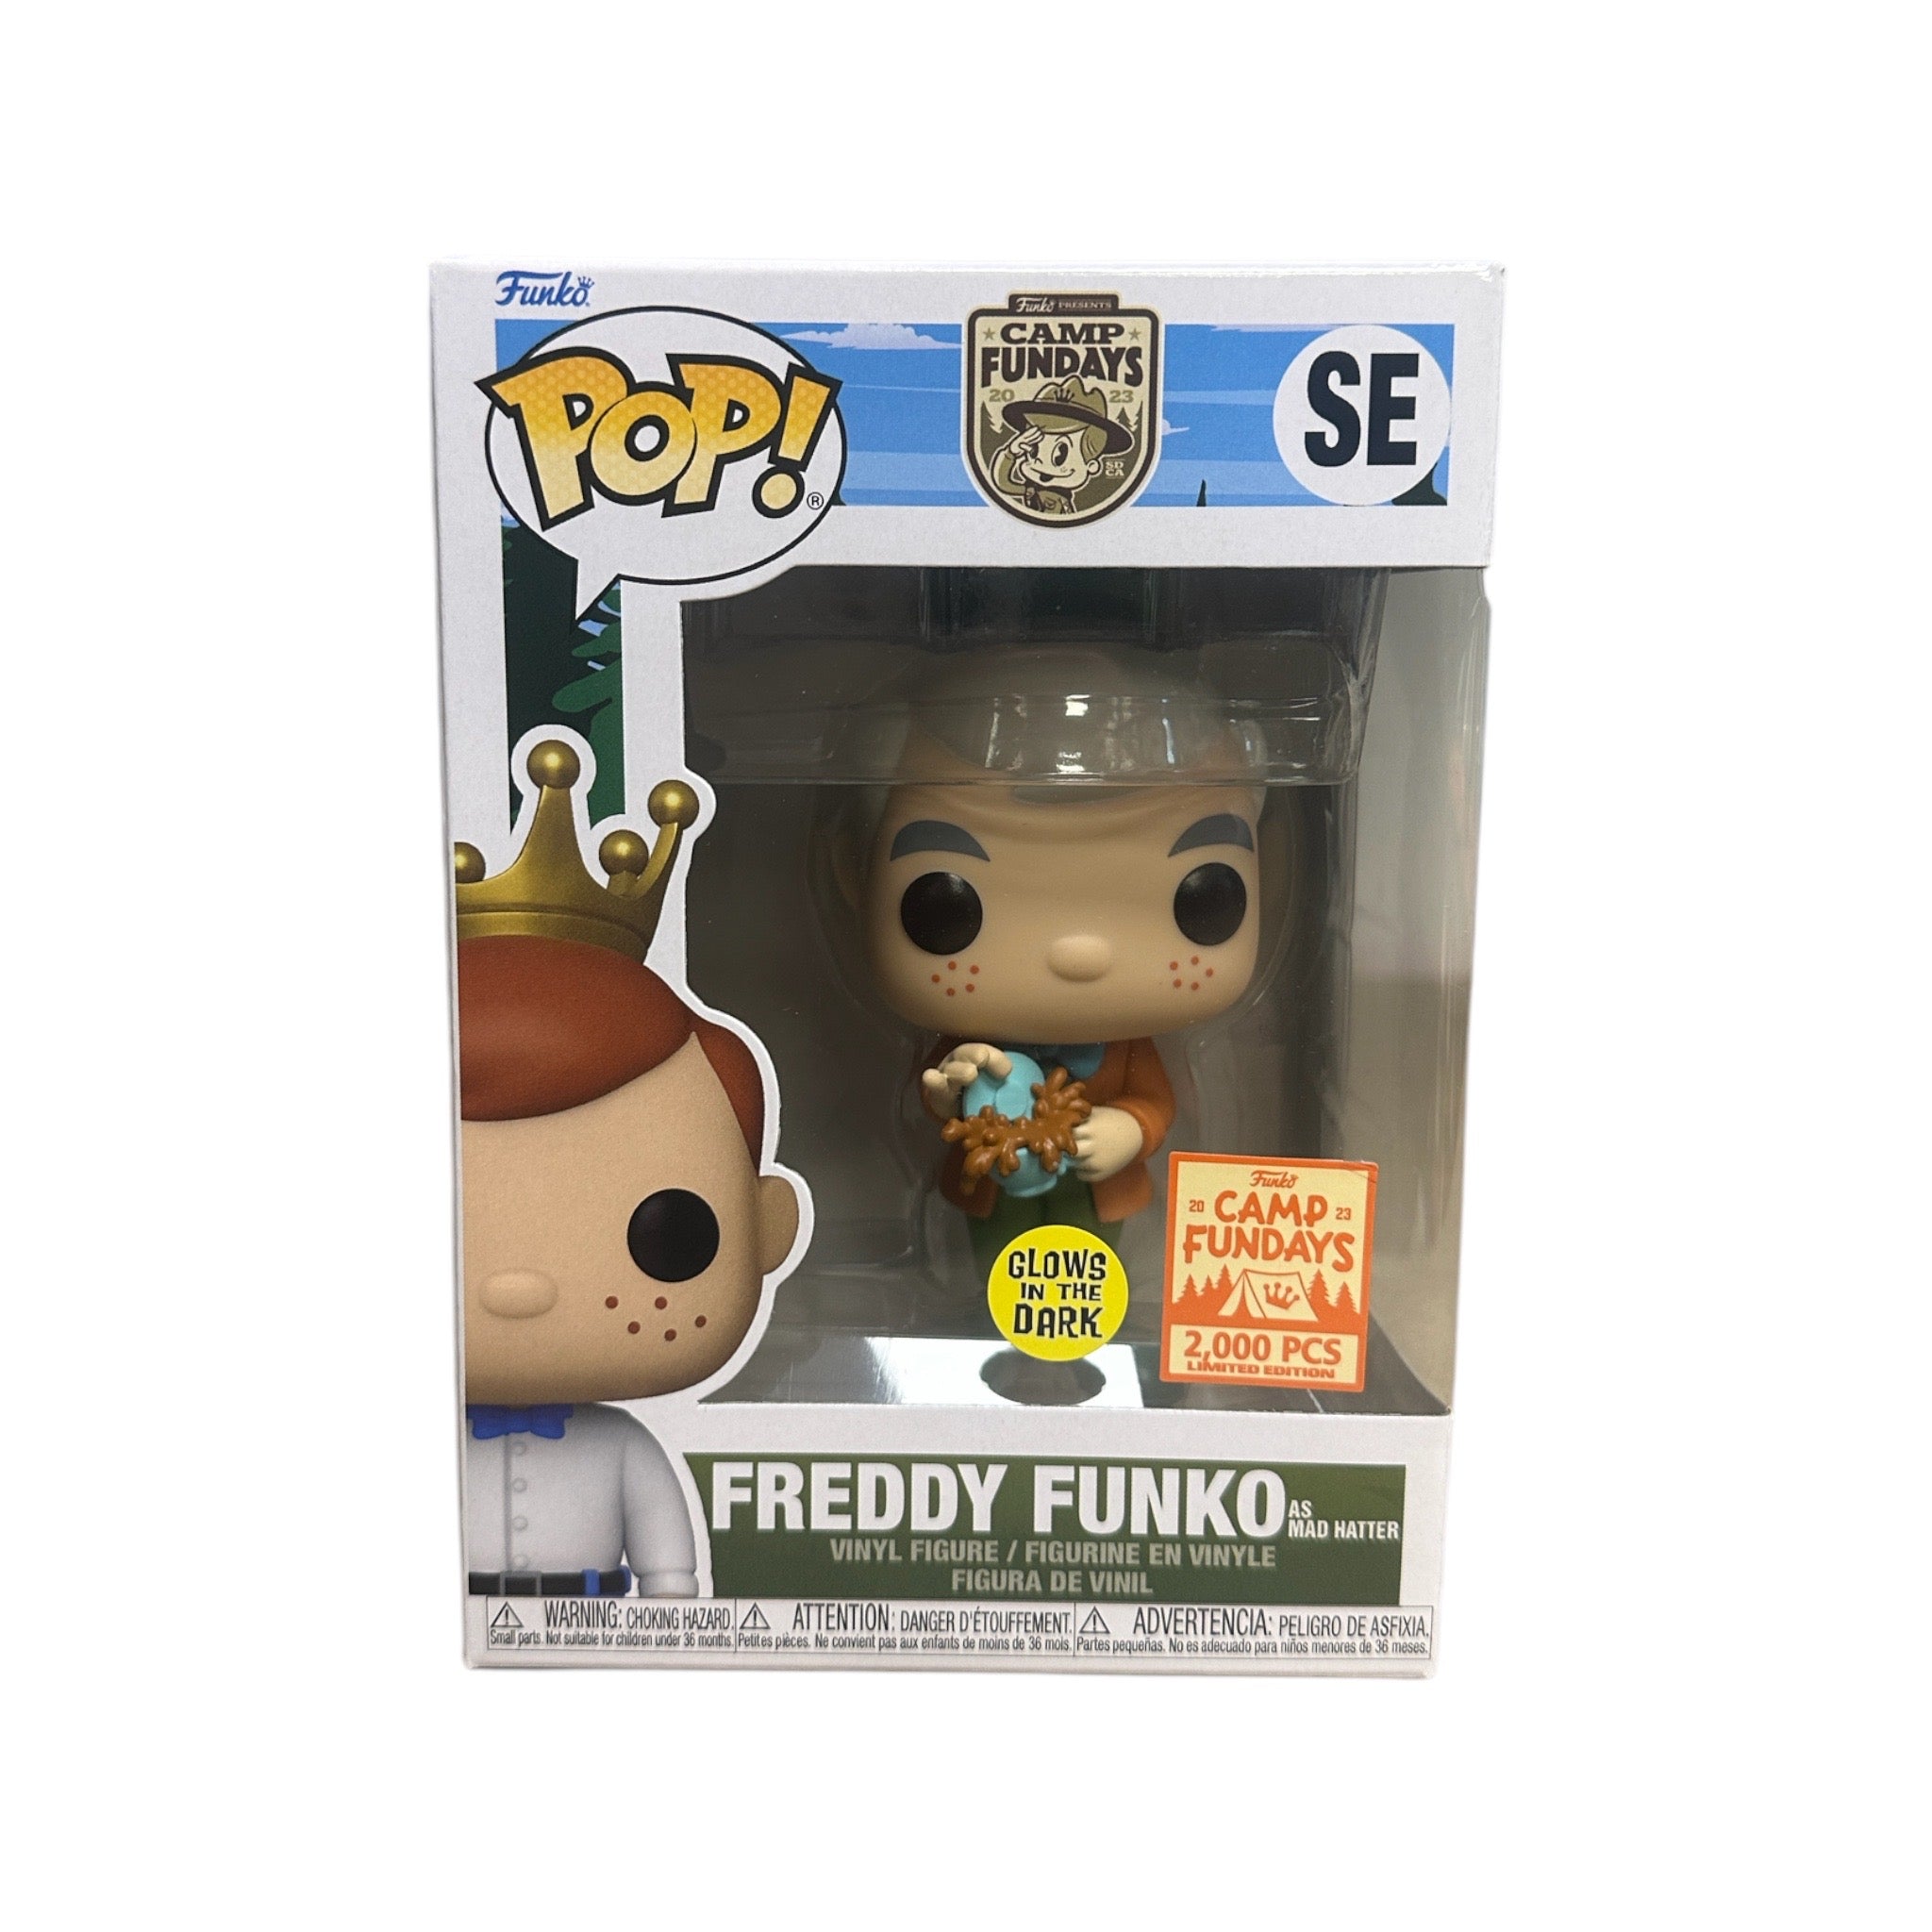 Freddy Funko as Mad Hatter (Glows in the Dark) Funko Pop! - Alice in Wonderland - Camp Fundays 2023 Exclusive LE2000 Pcs